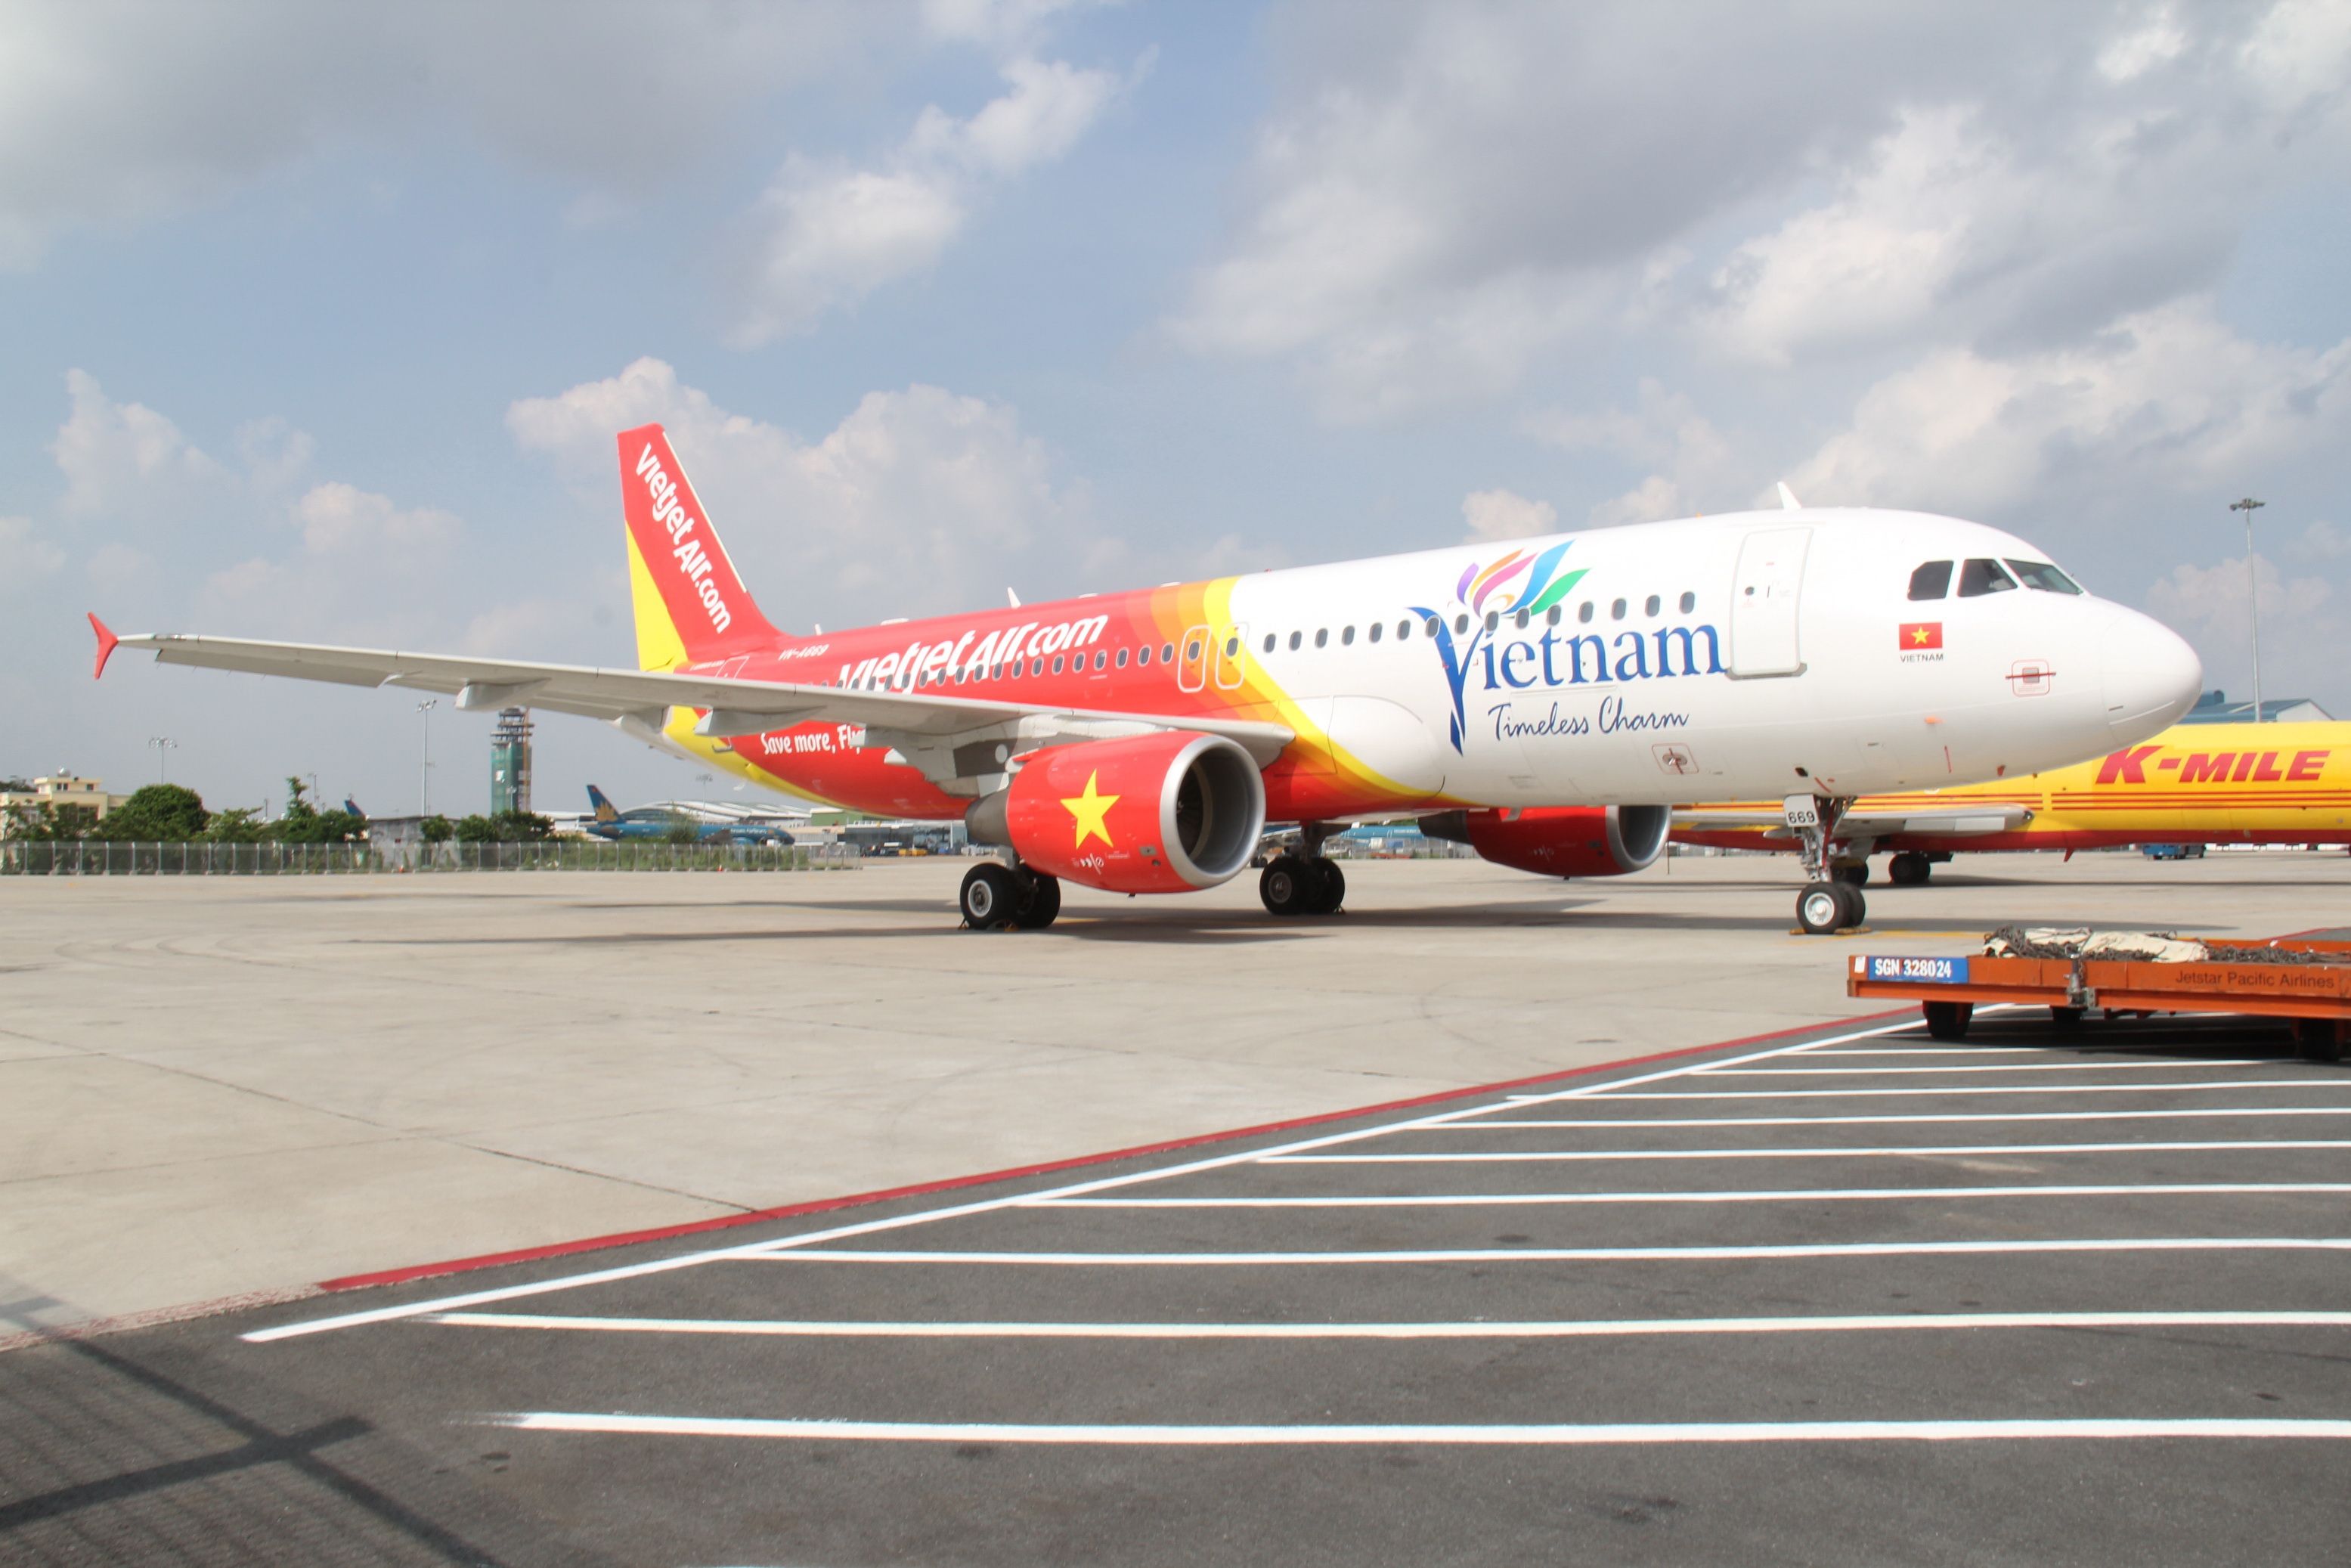 VietJet Air to offer 49 per cent discount on fares